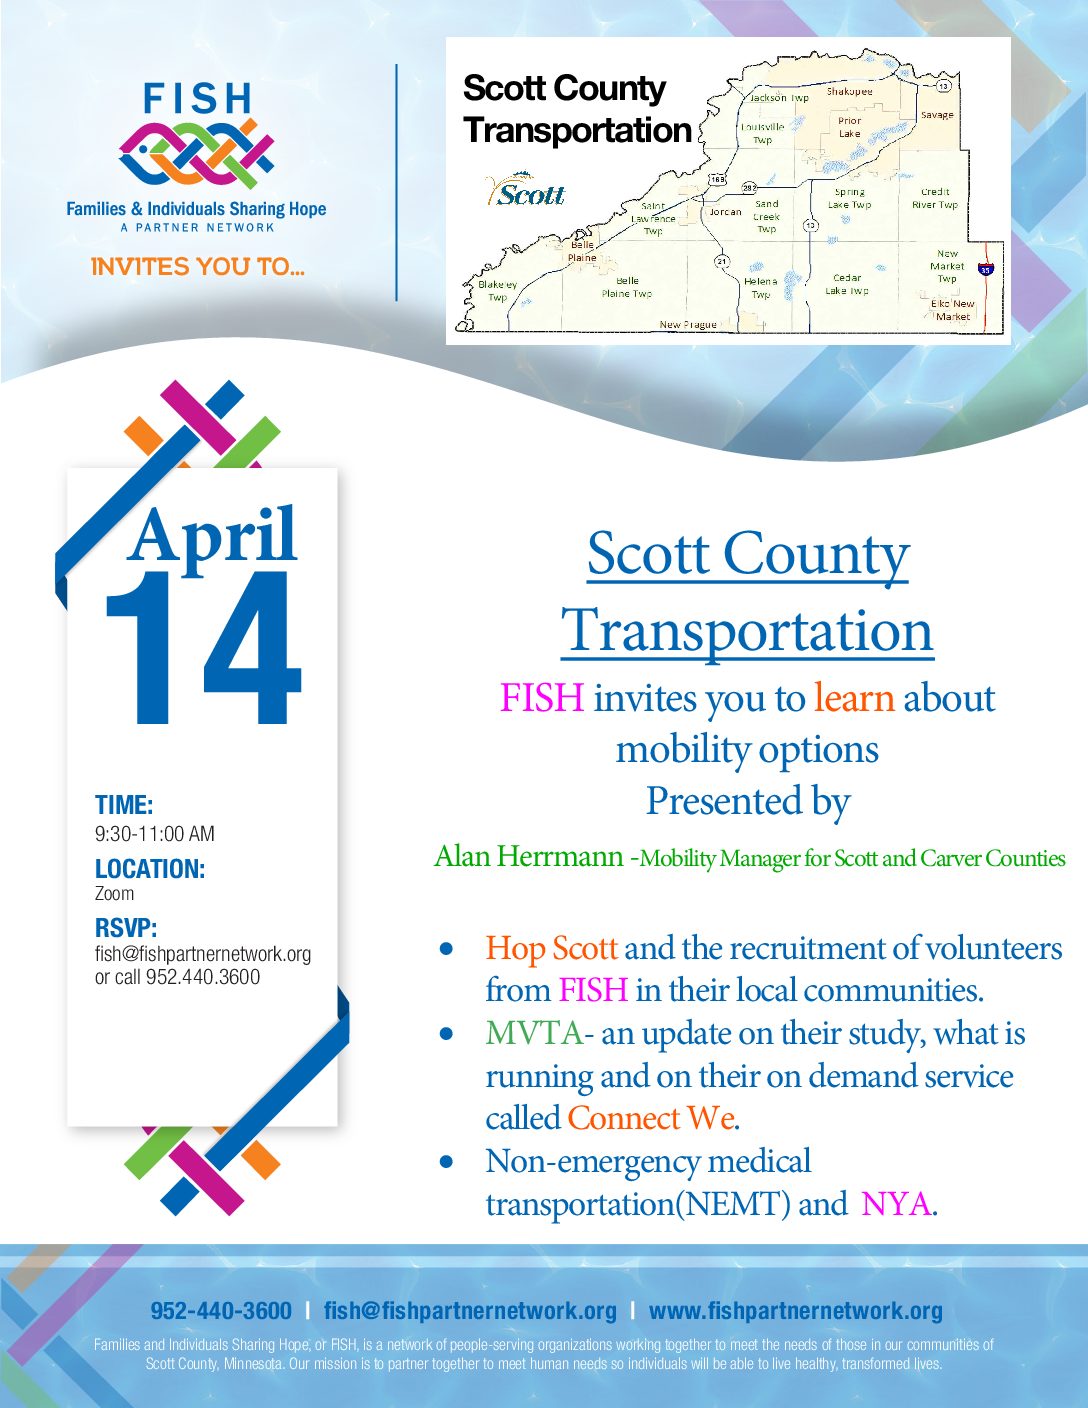 Mobility Options in Scott County